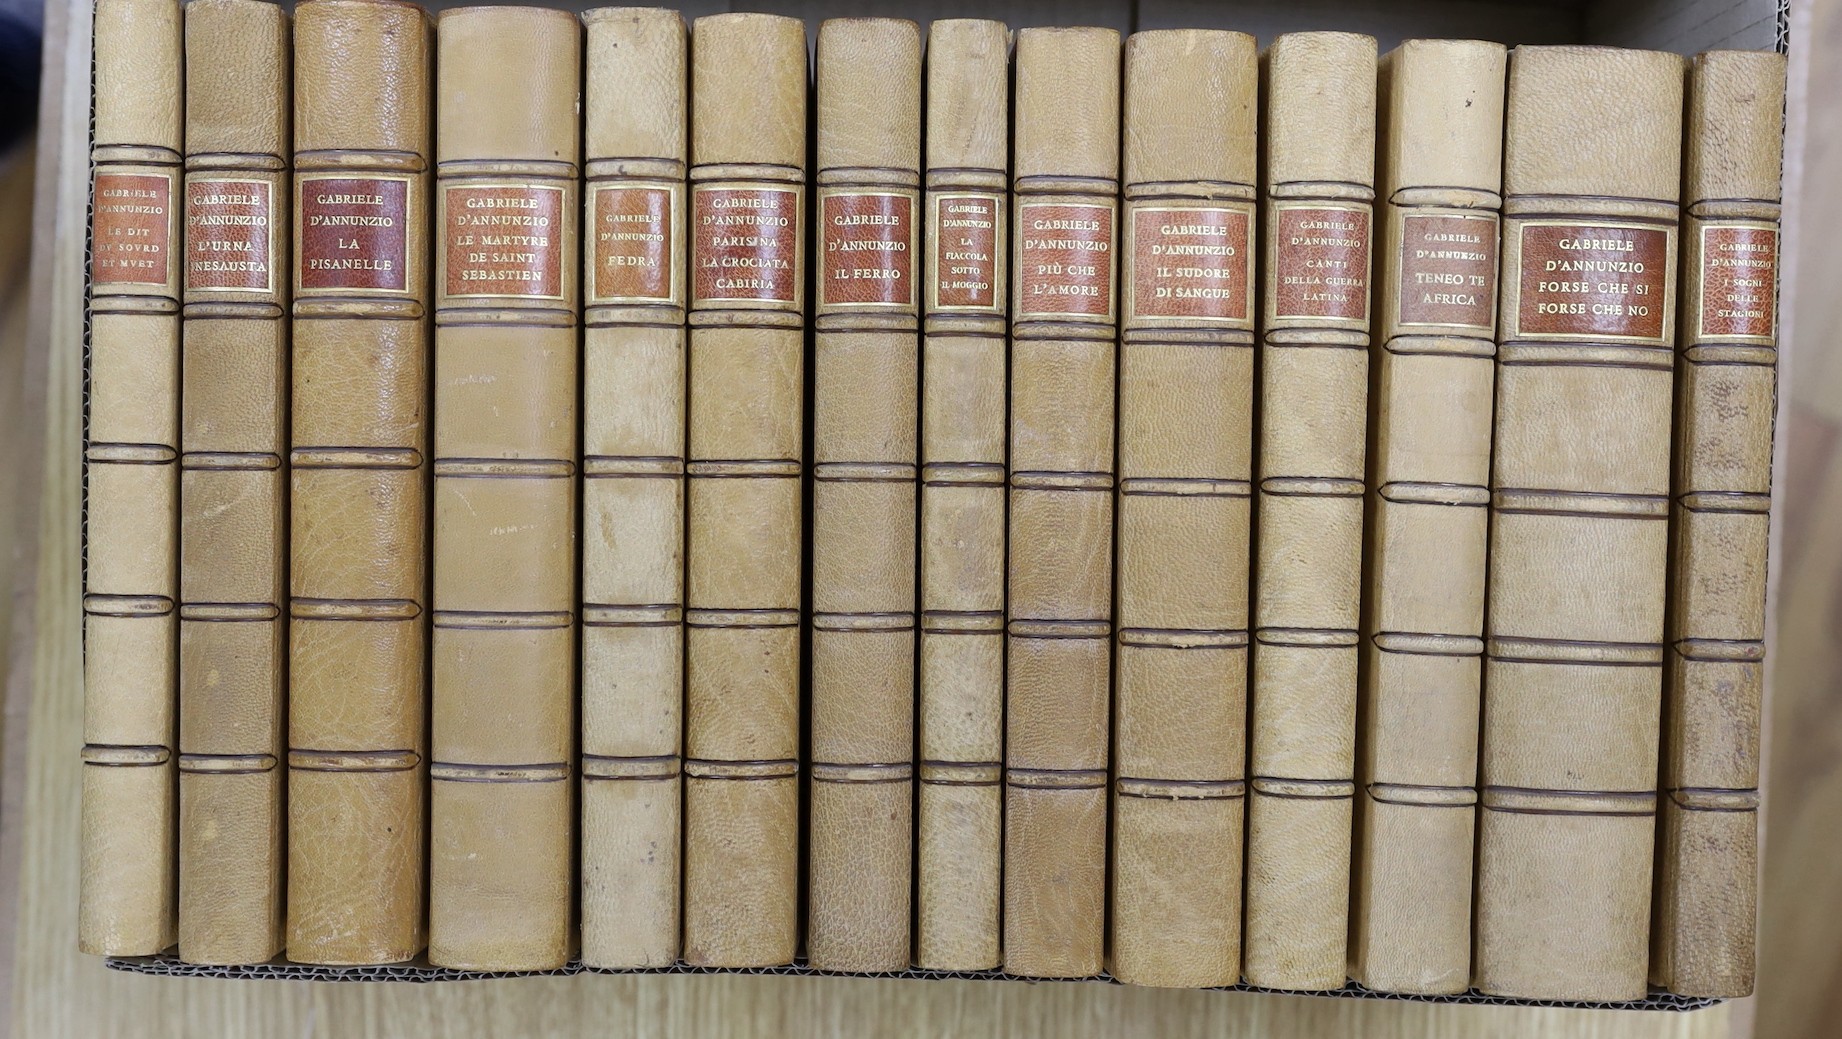 D'Annunzio, Gabriele - (Collected Writings, Instituto Nazionale Edition). 40 vols. photo plates and facsimiles; publisher's tan half morocco and marbled boards, panelled spines with red labels, gilt tops, partly unopened